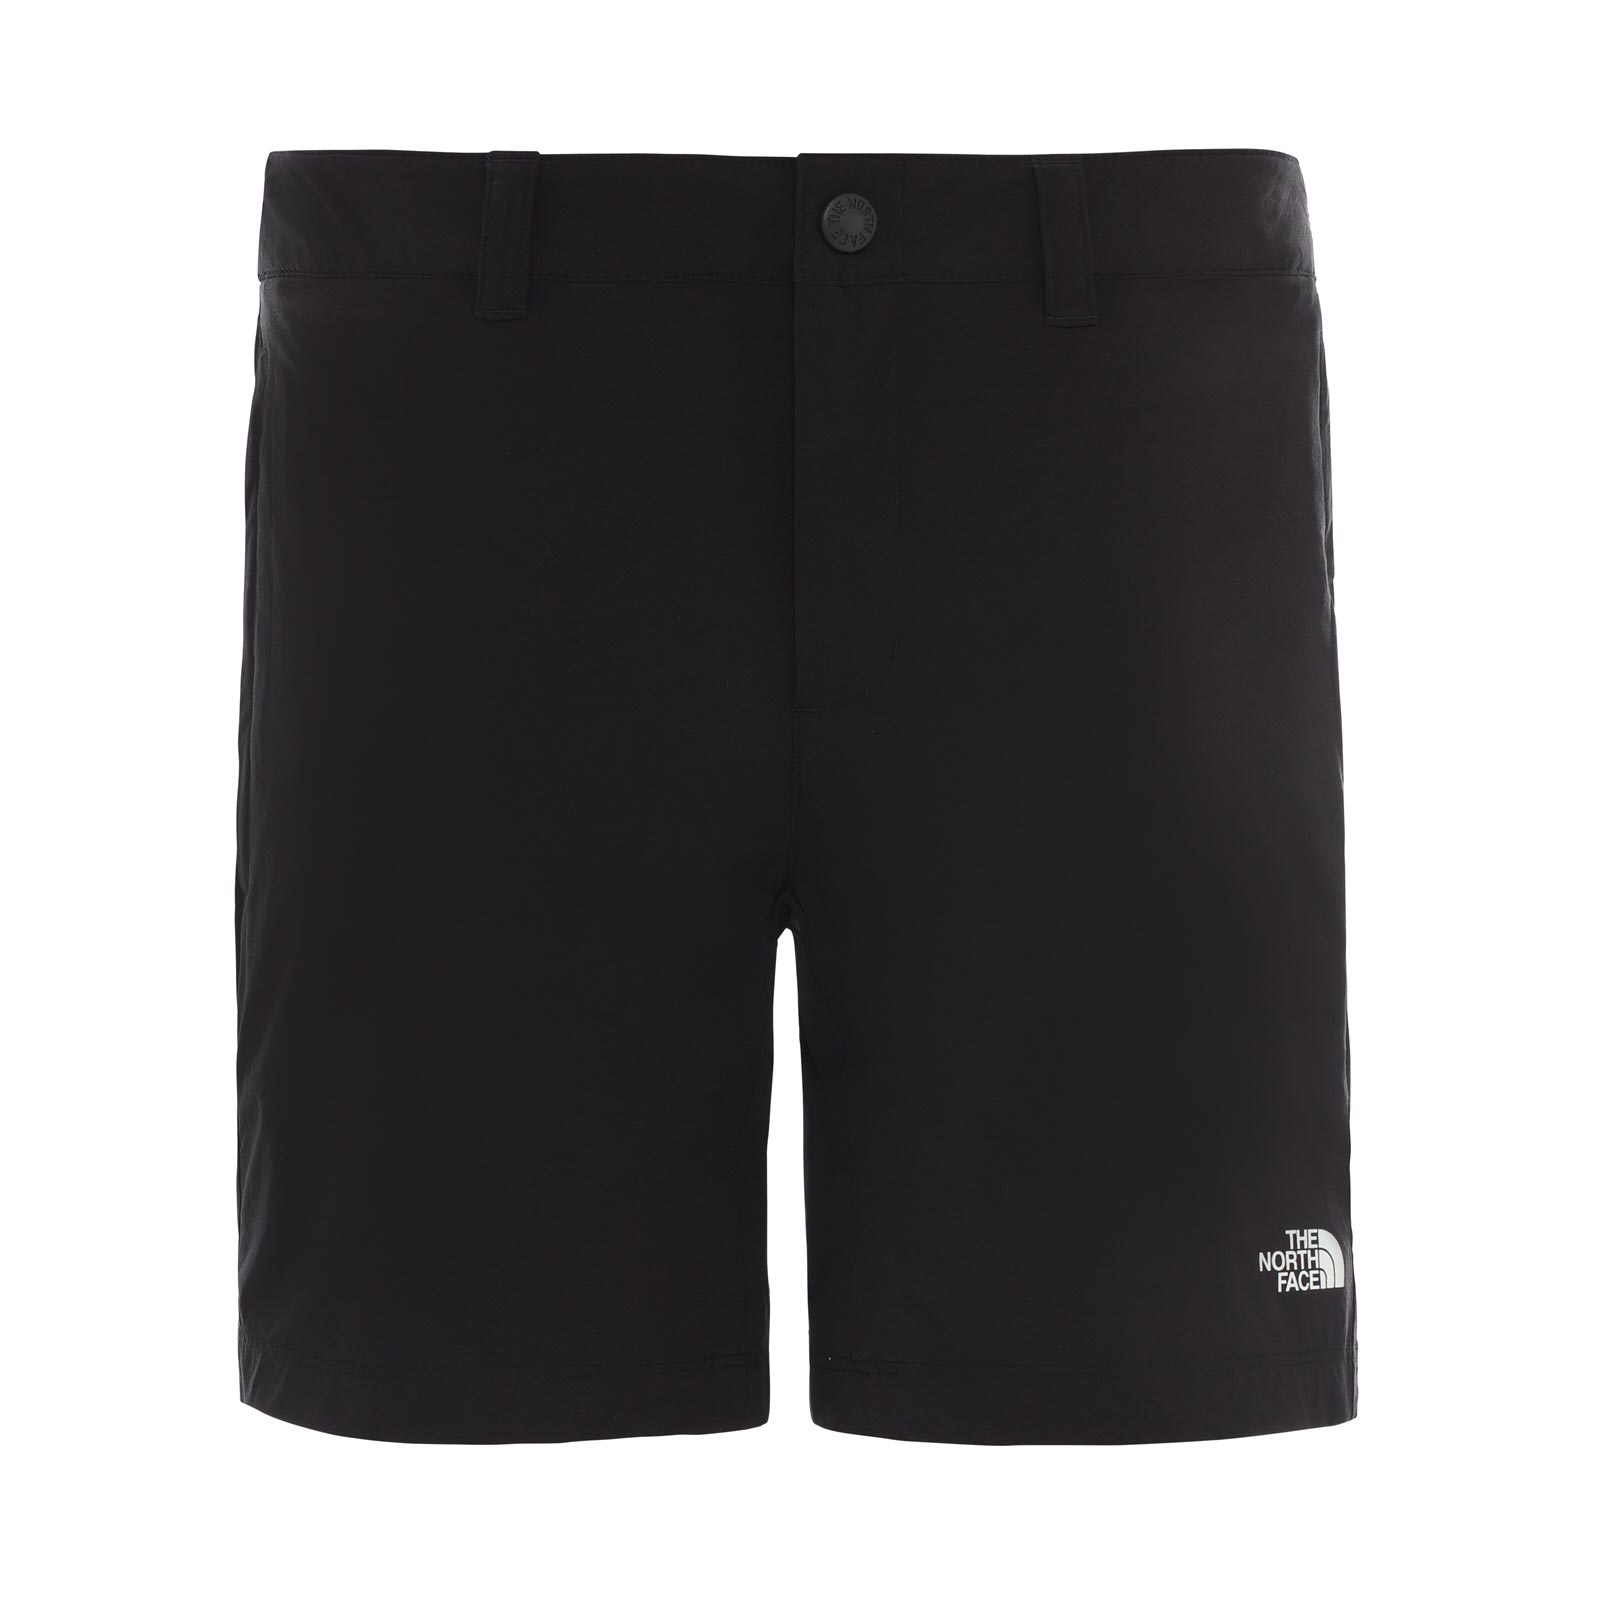 THE NORTH FACE WOMENS EXTENT IV SHORT BLACK